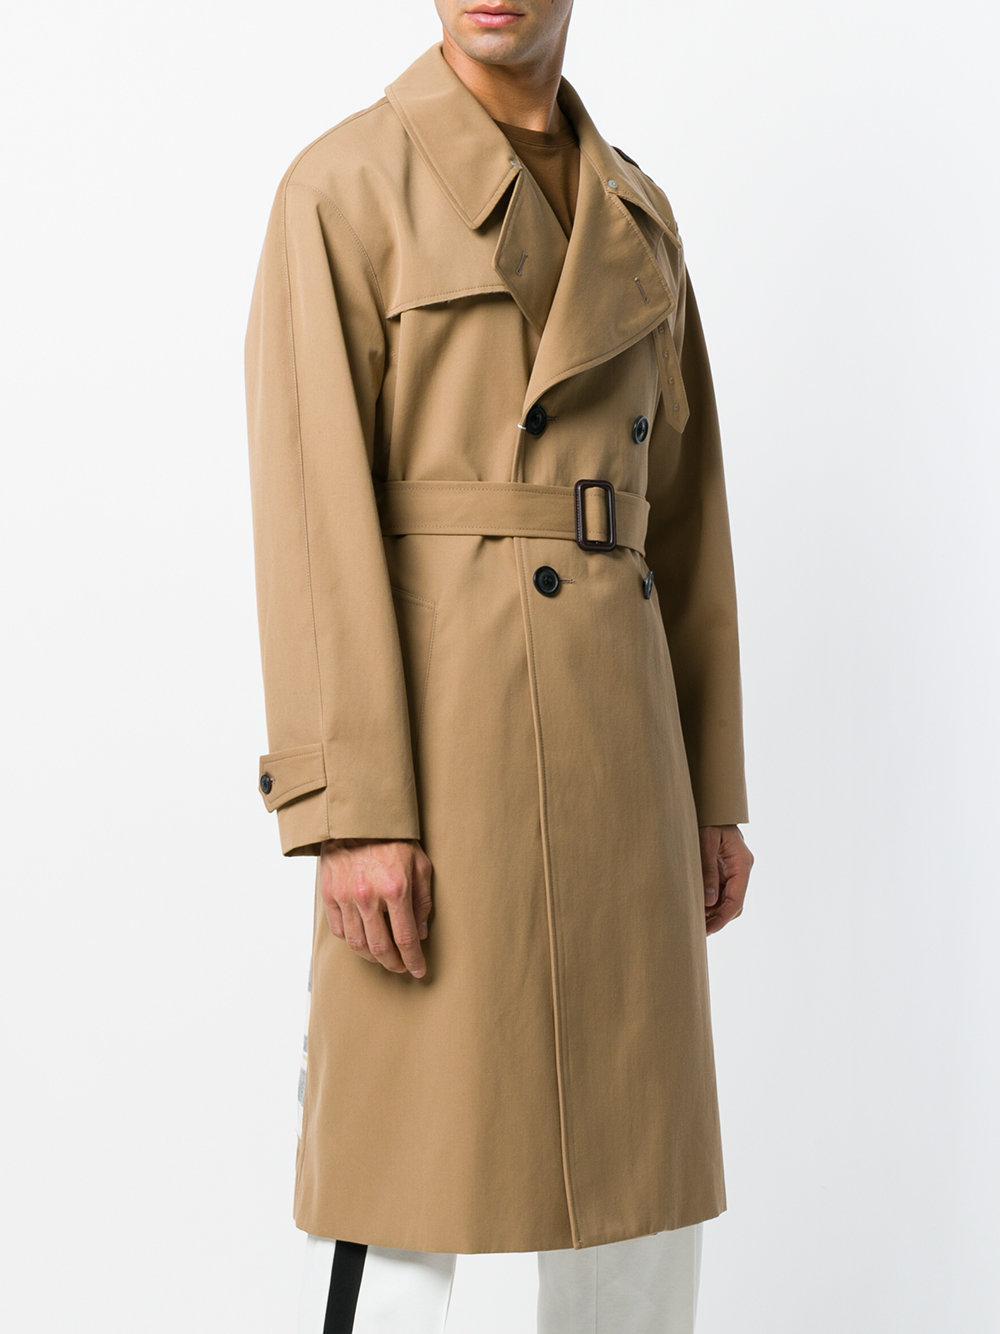 Maison Margiela Cotton Plaid Back Trench Coat in Brown for Men - Lyst